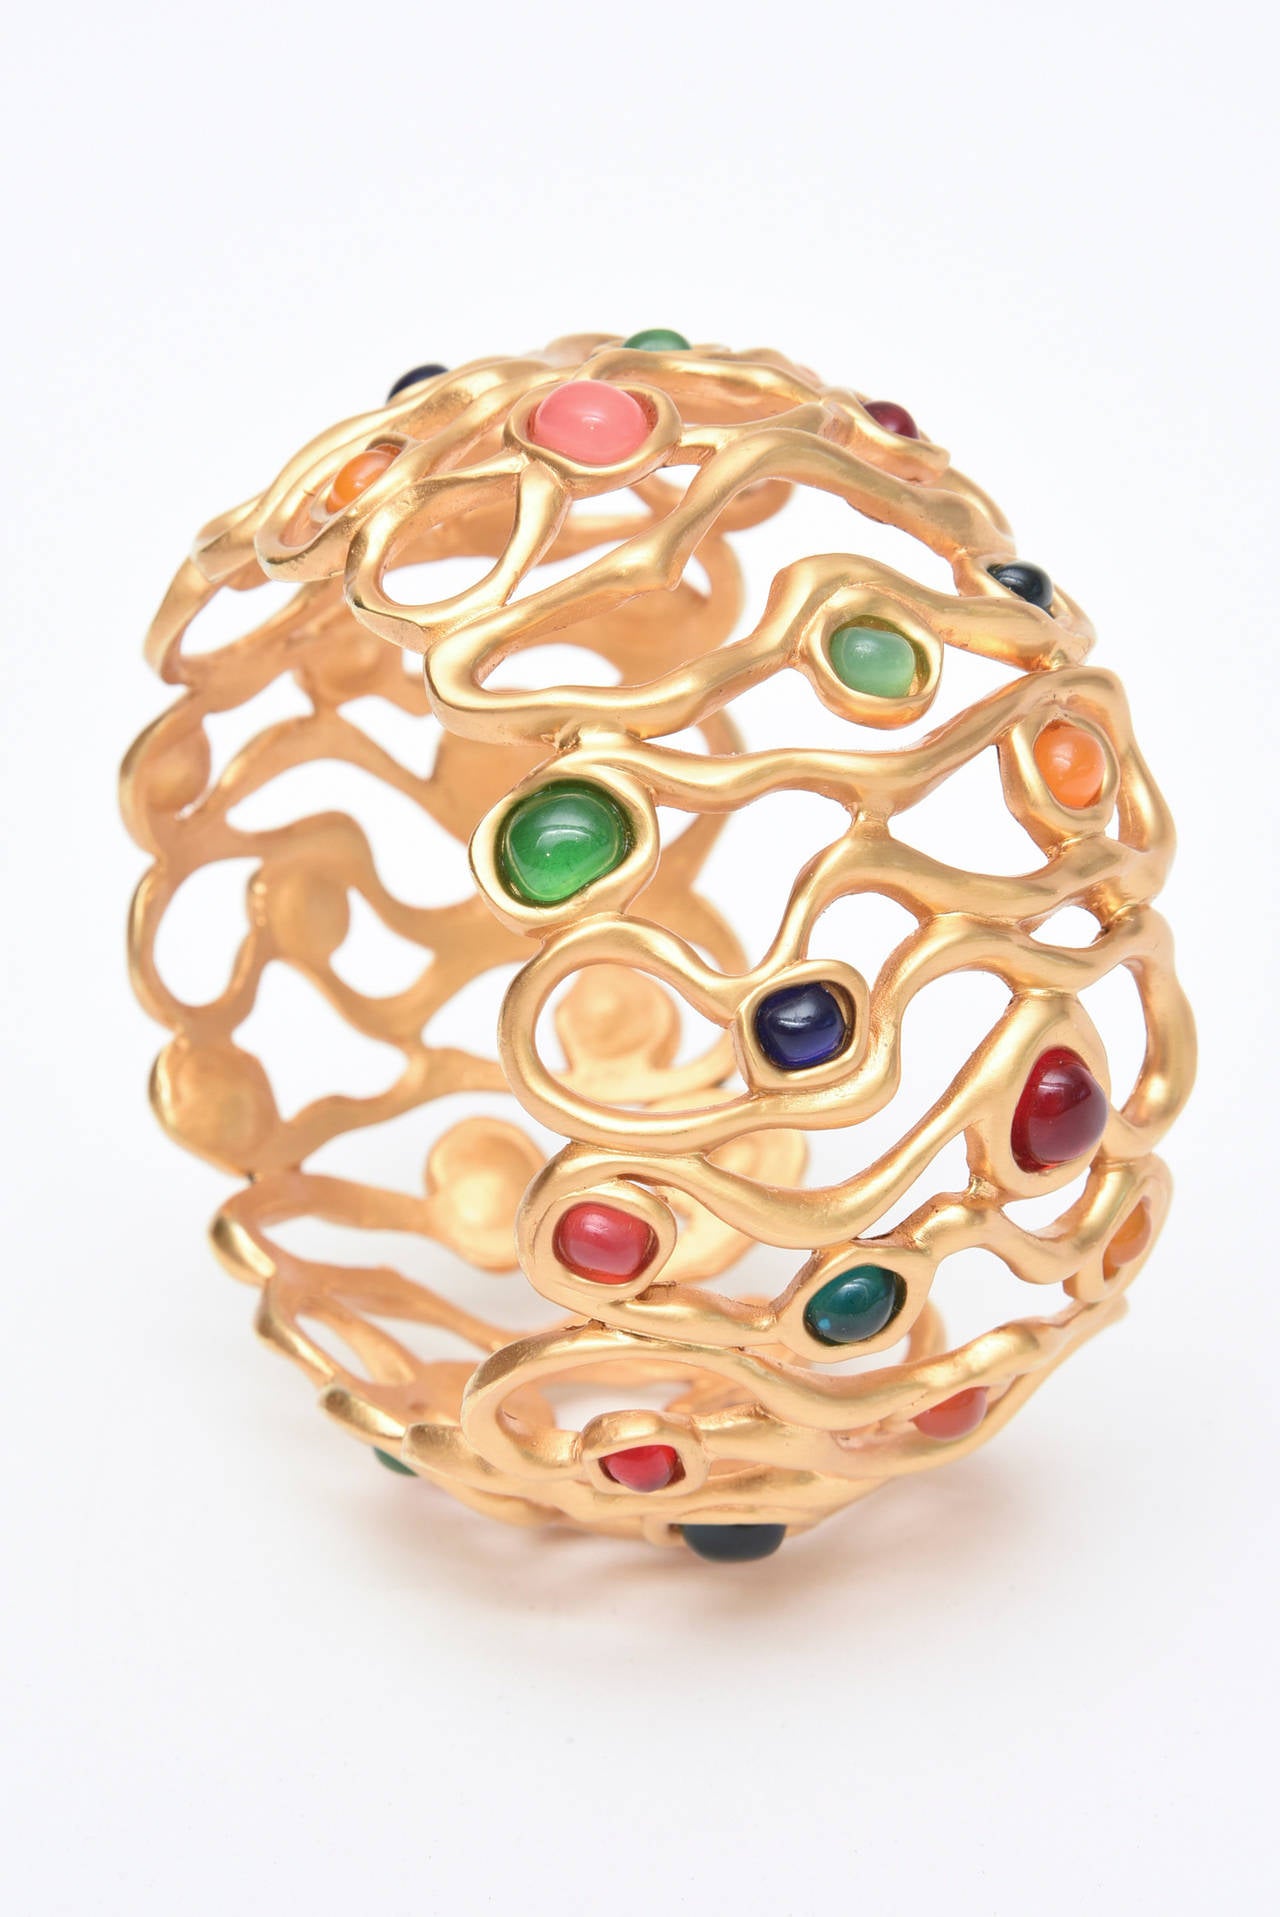 The open sculptural design of the gold plated wide cuff bracelet with amazing The luscious jewel tone colored stones large cuff make this a statement piece. It has a very Yves St Laurent look to it!  It is like the tree of life in circular form. The